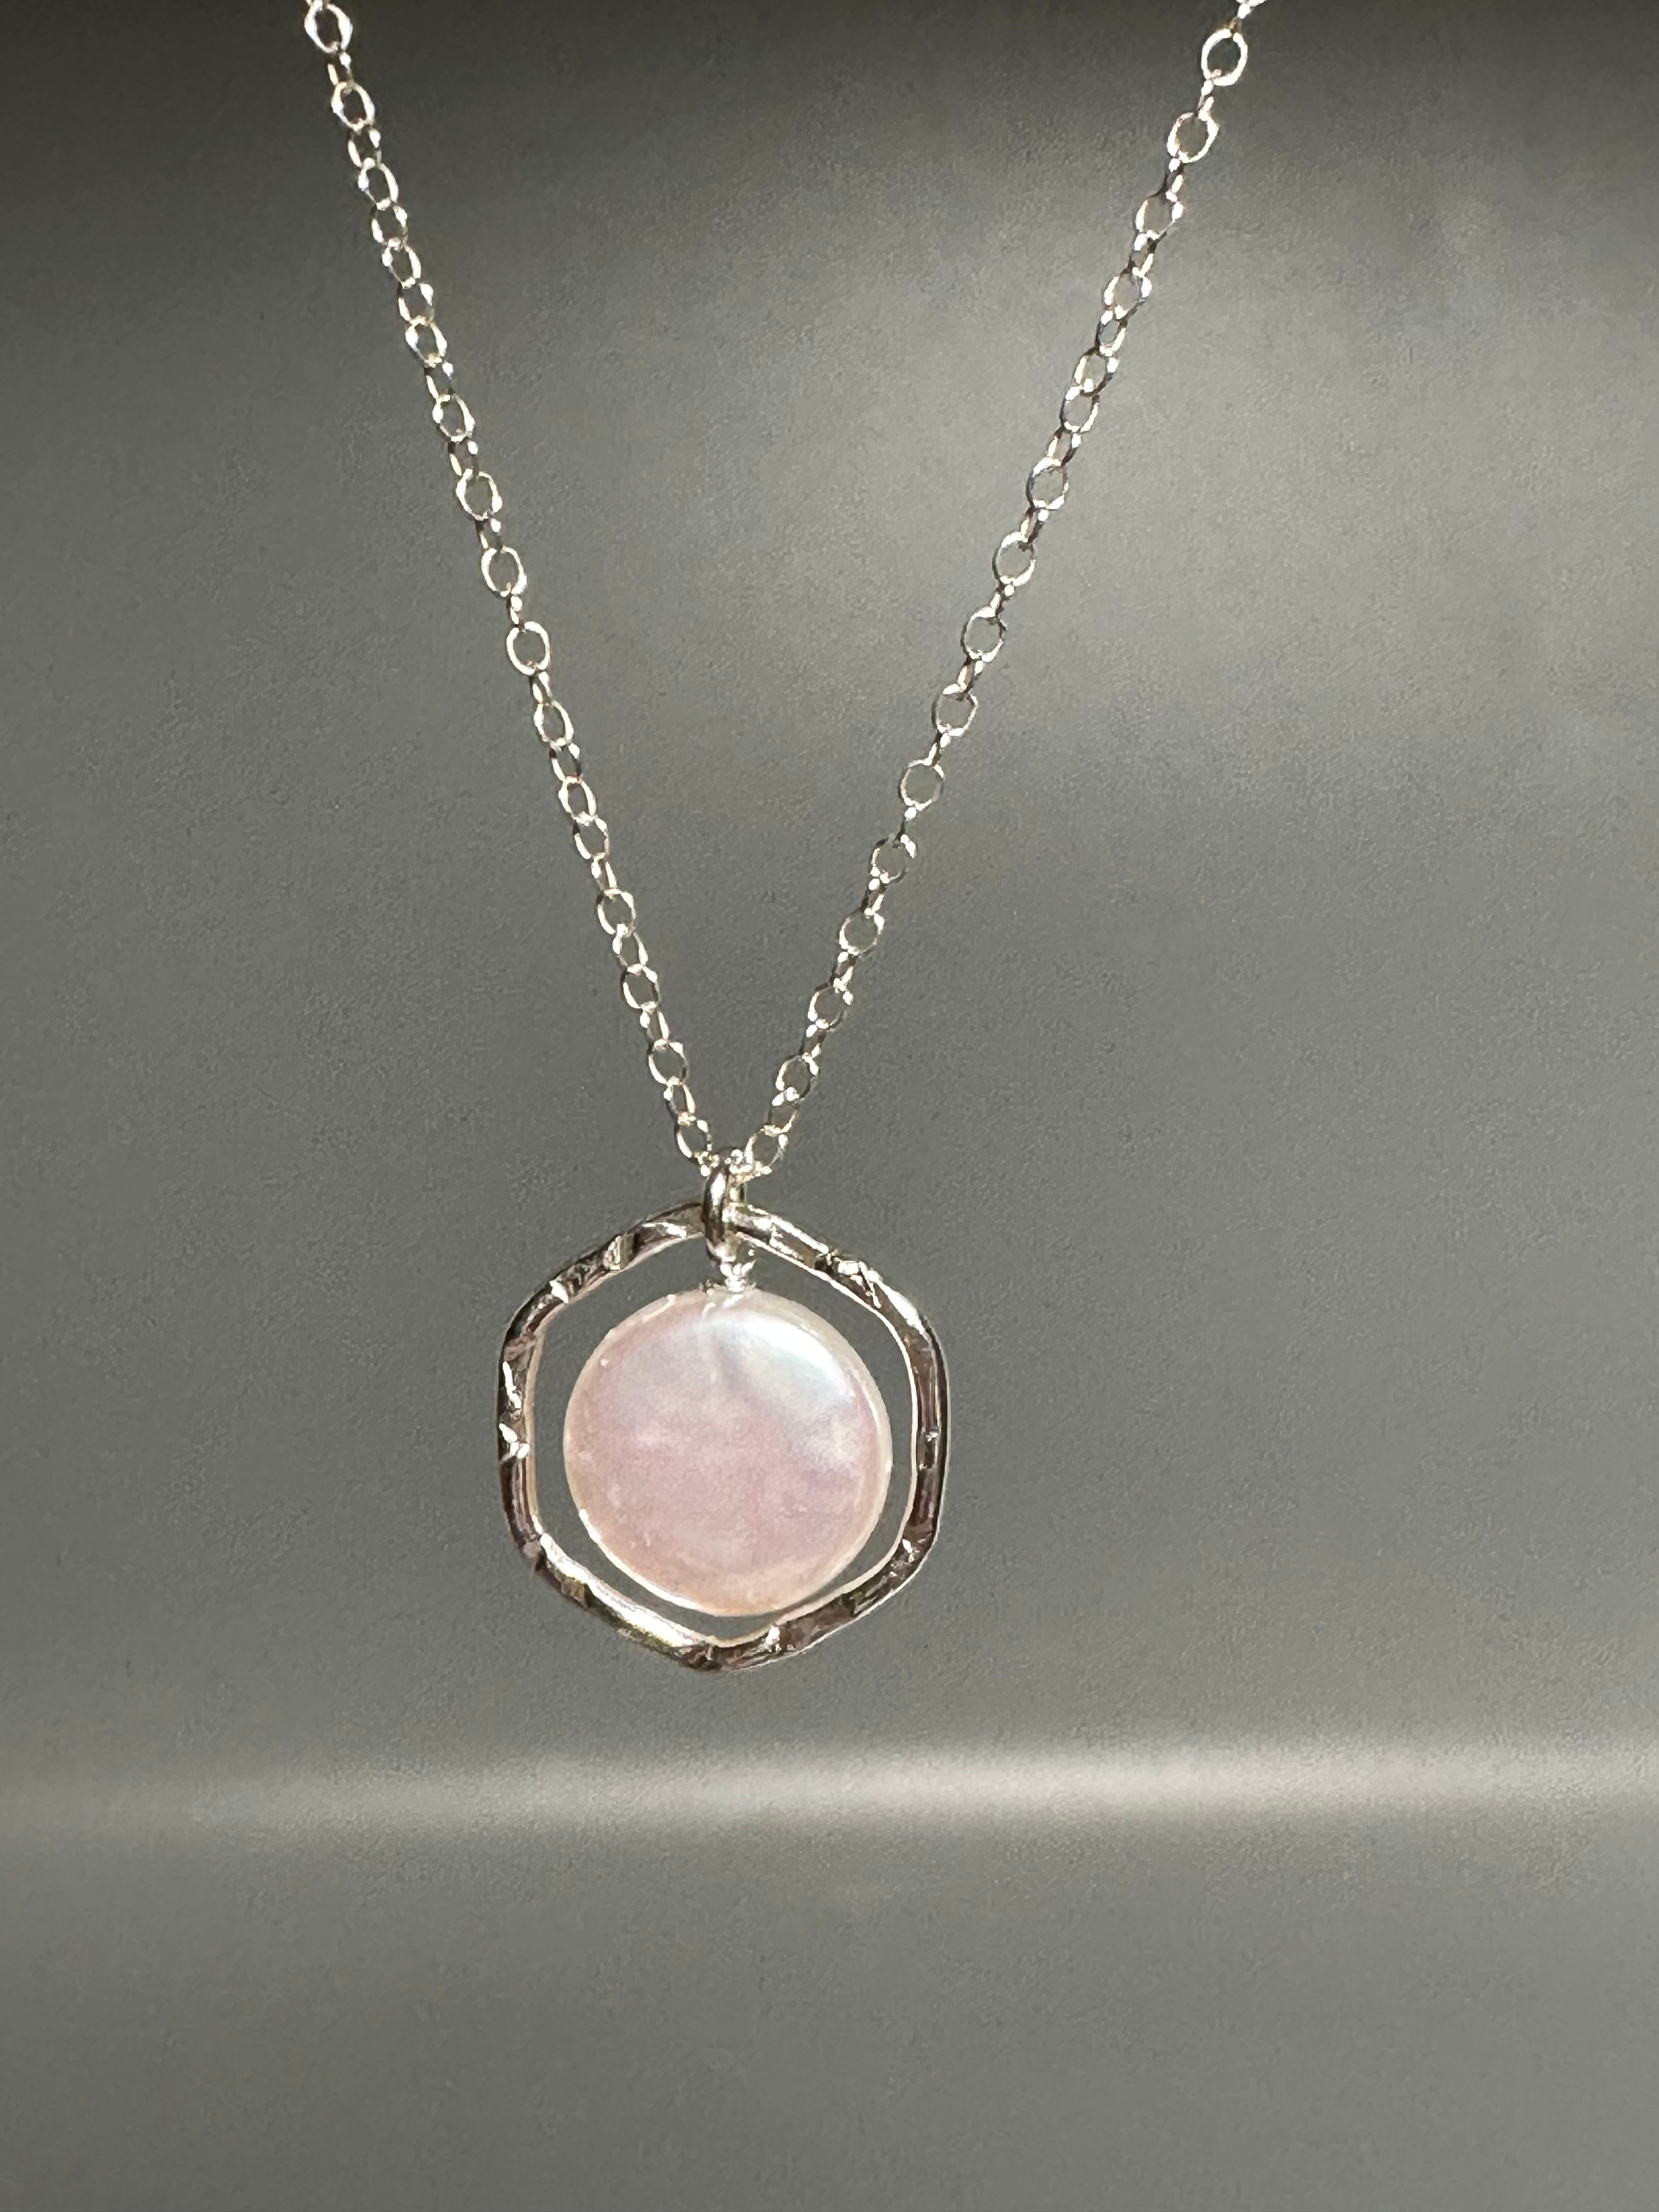 Coin Pearl Framed Necklace